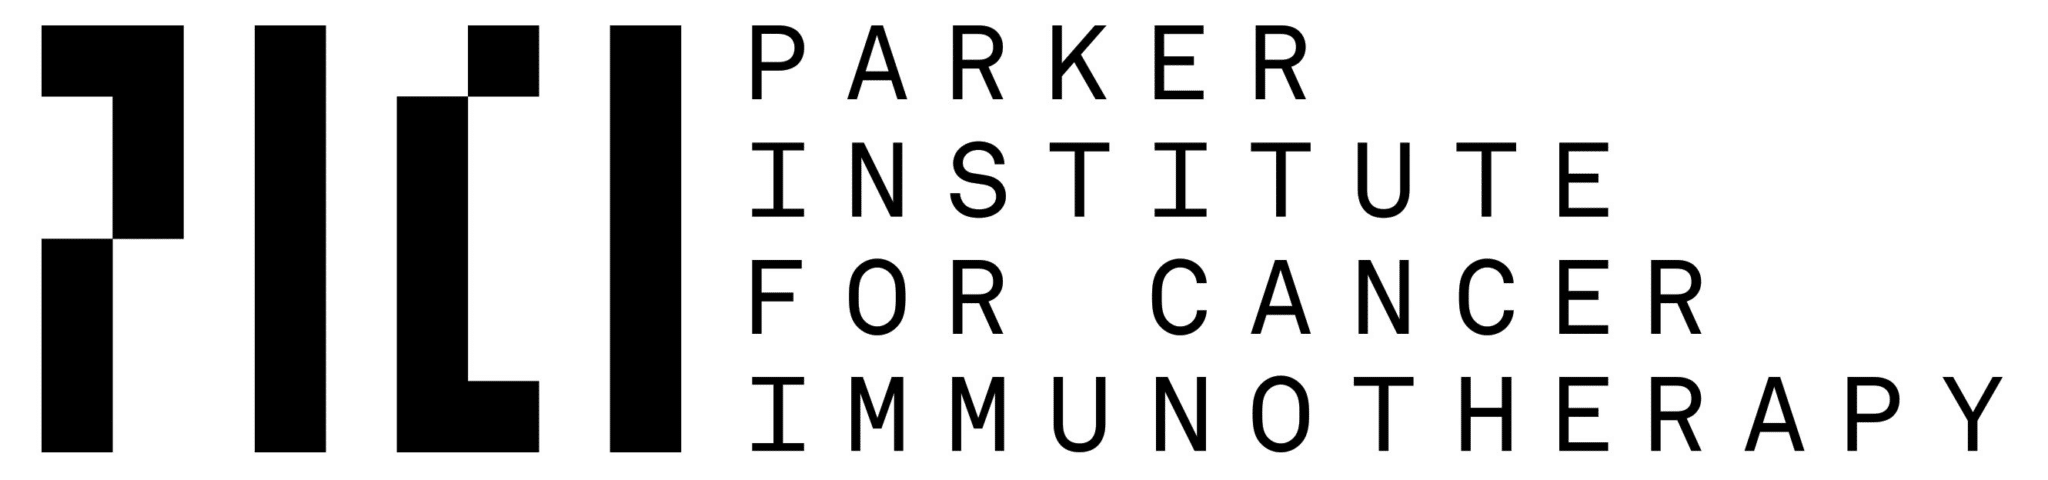 Parker institute for cancer immunotherapy